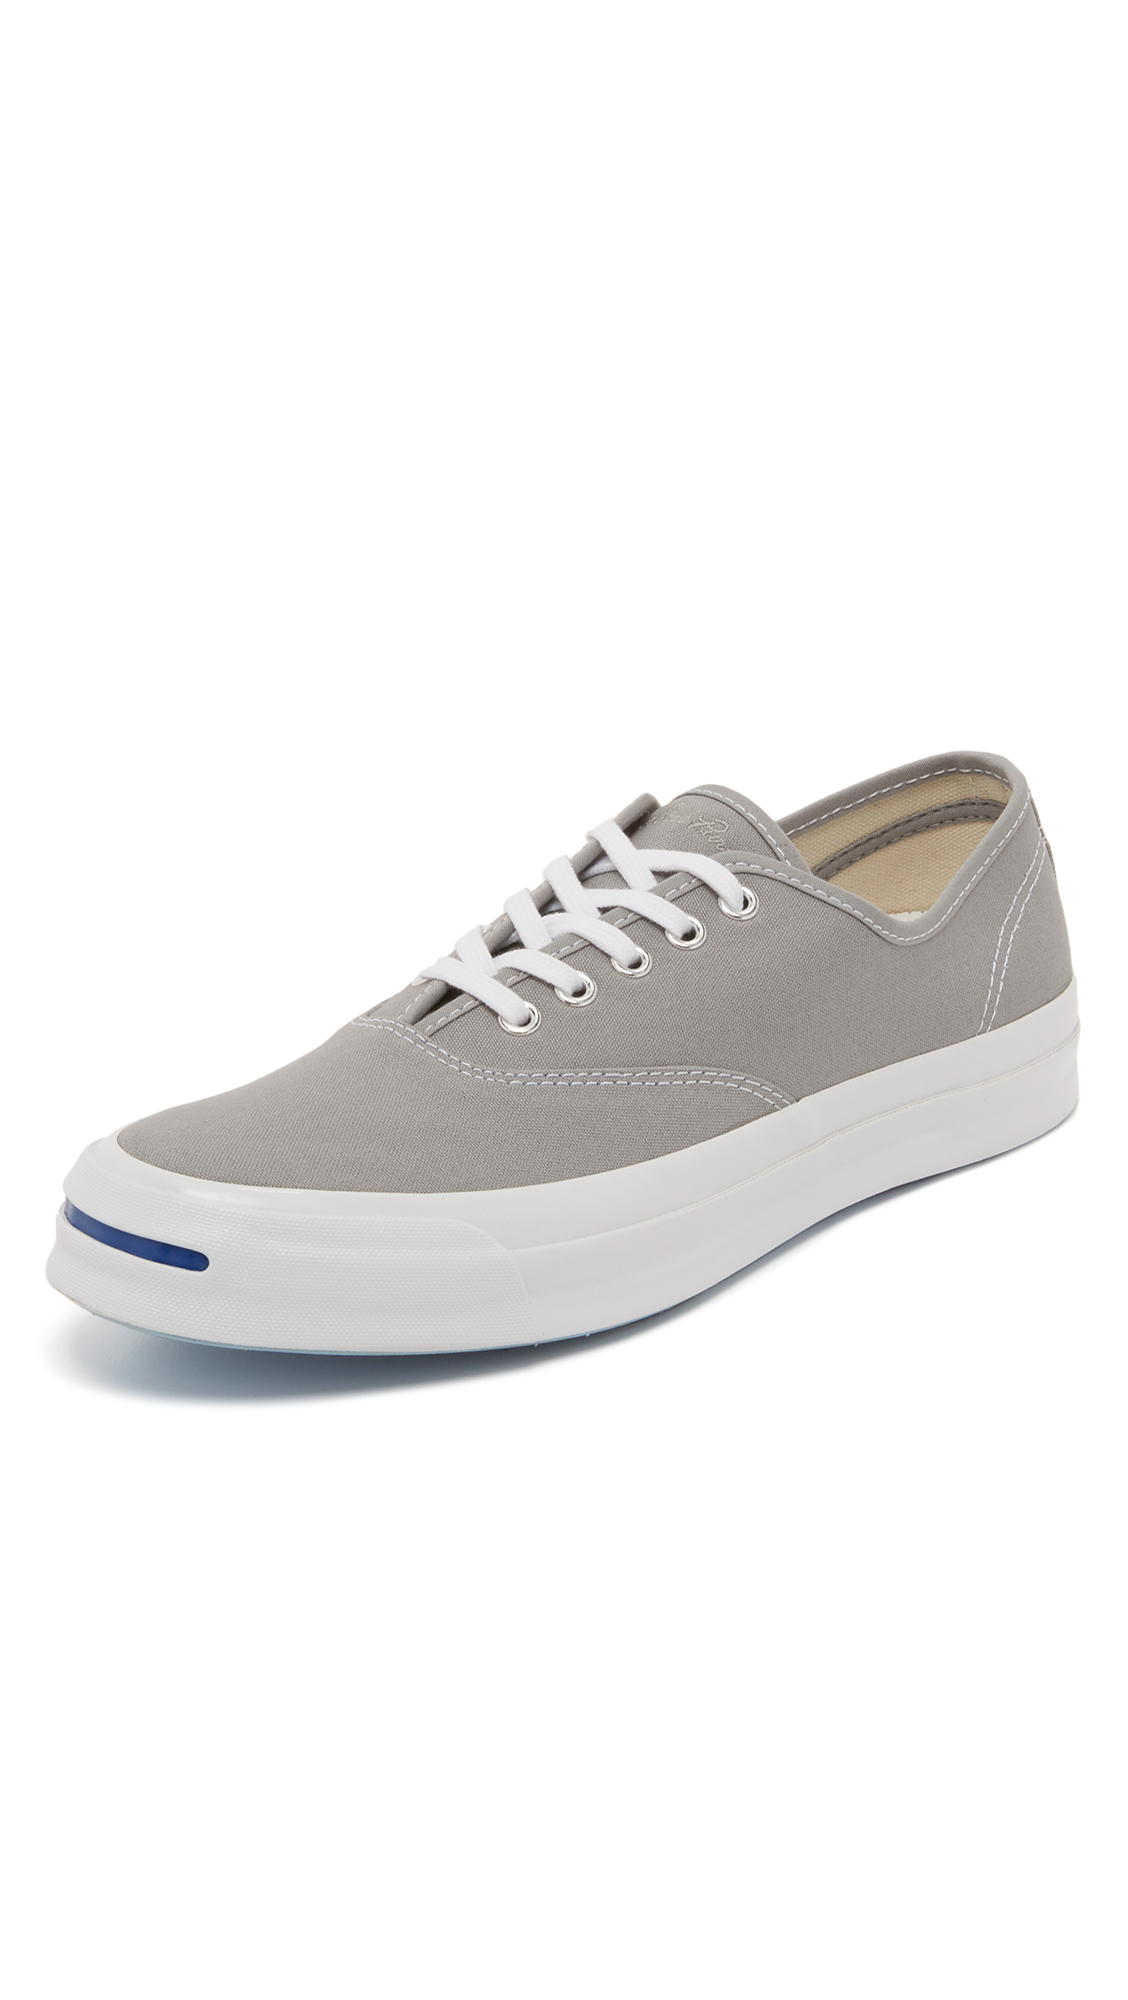 jack purcell cvo